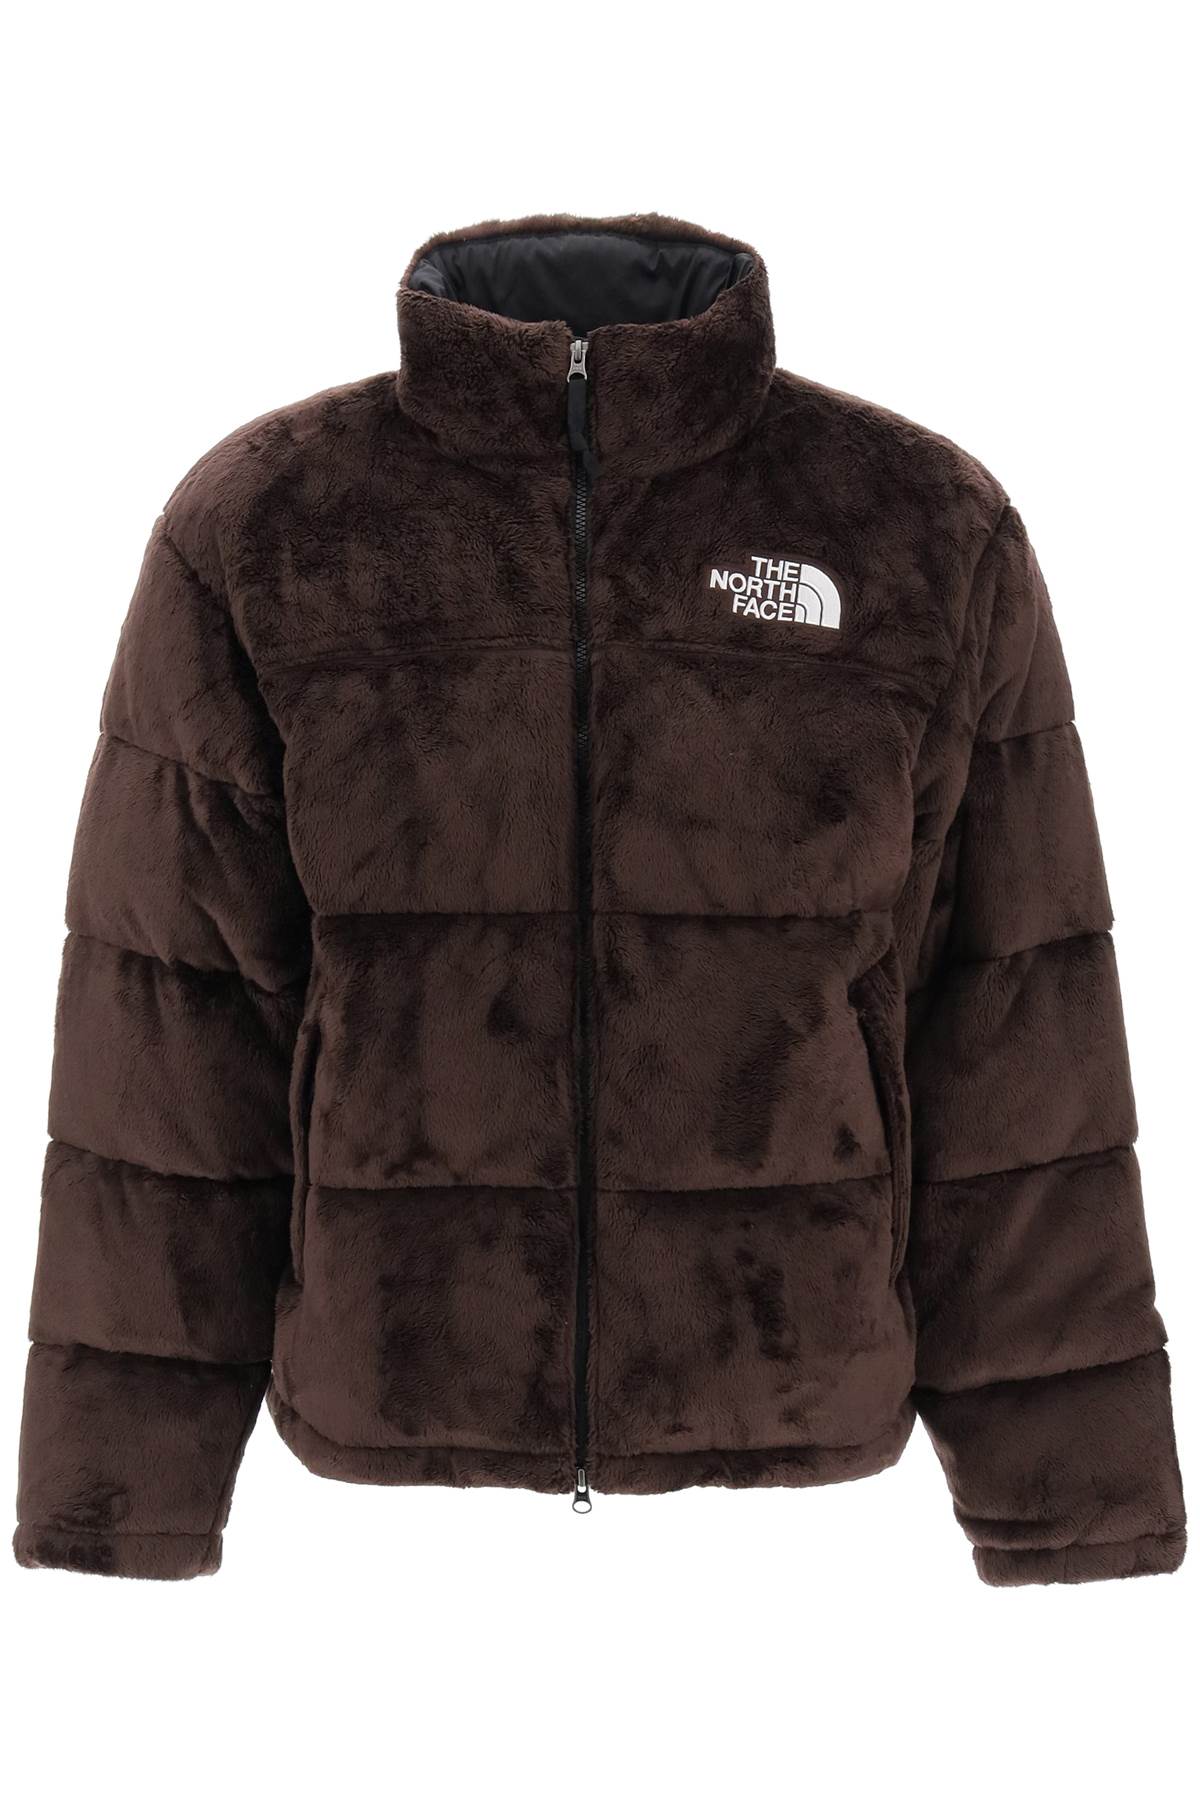 THE NORTH FACE NUPTSE VELOUR PUFFER JACKET